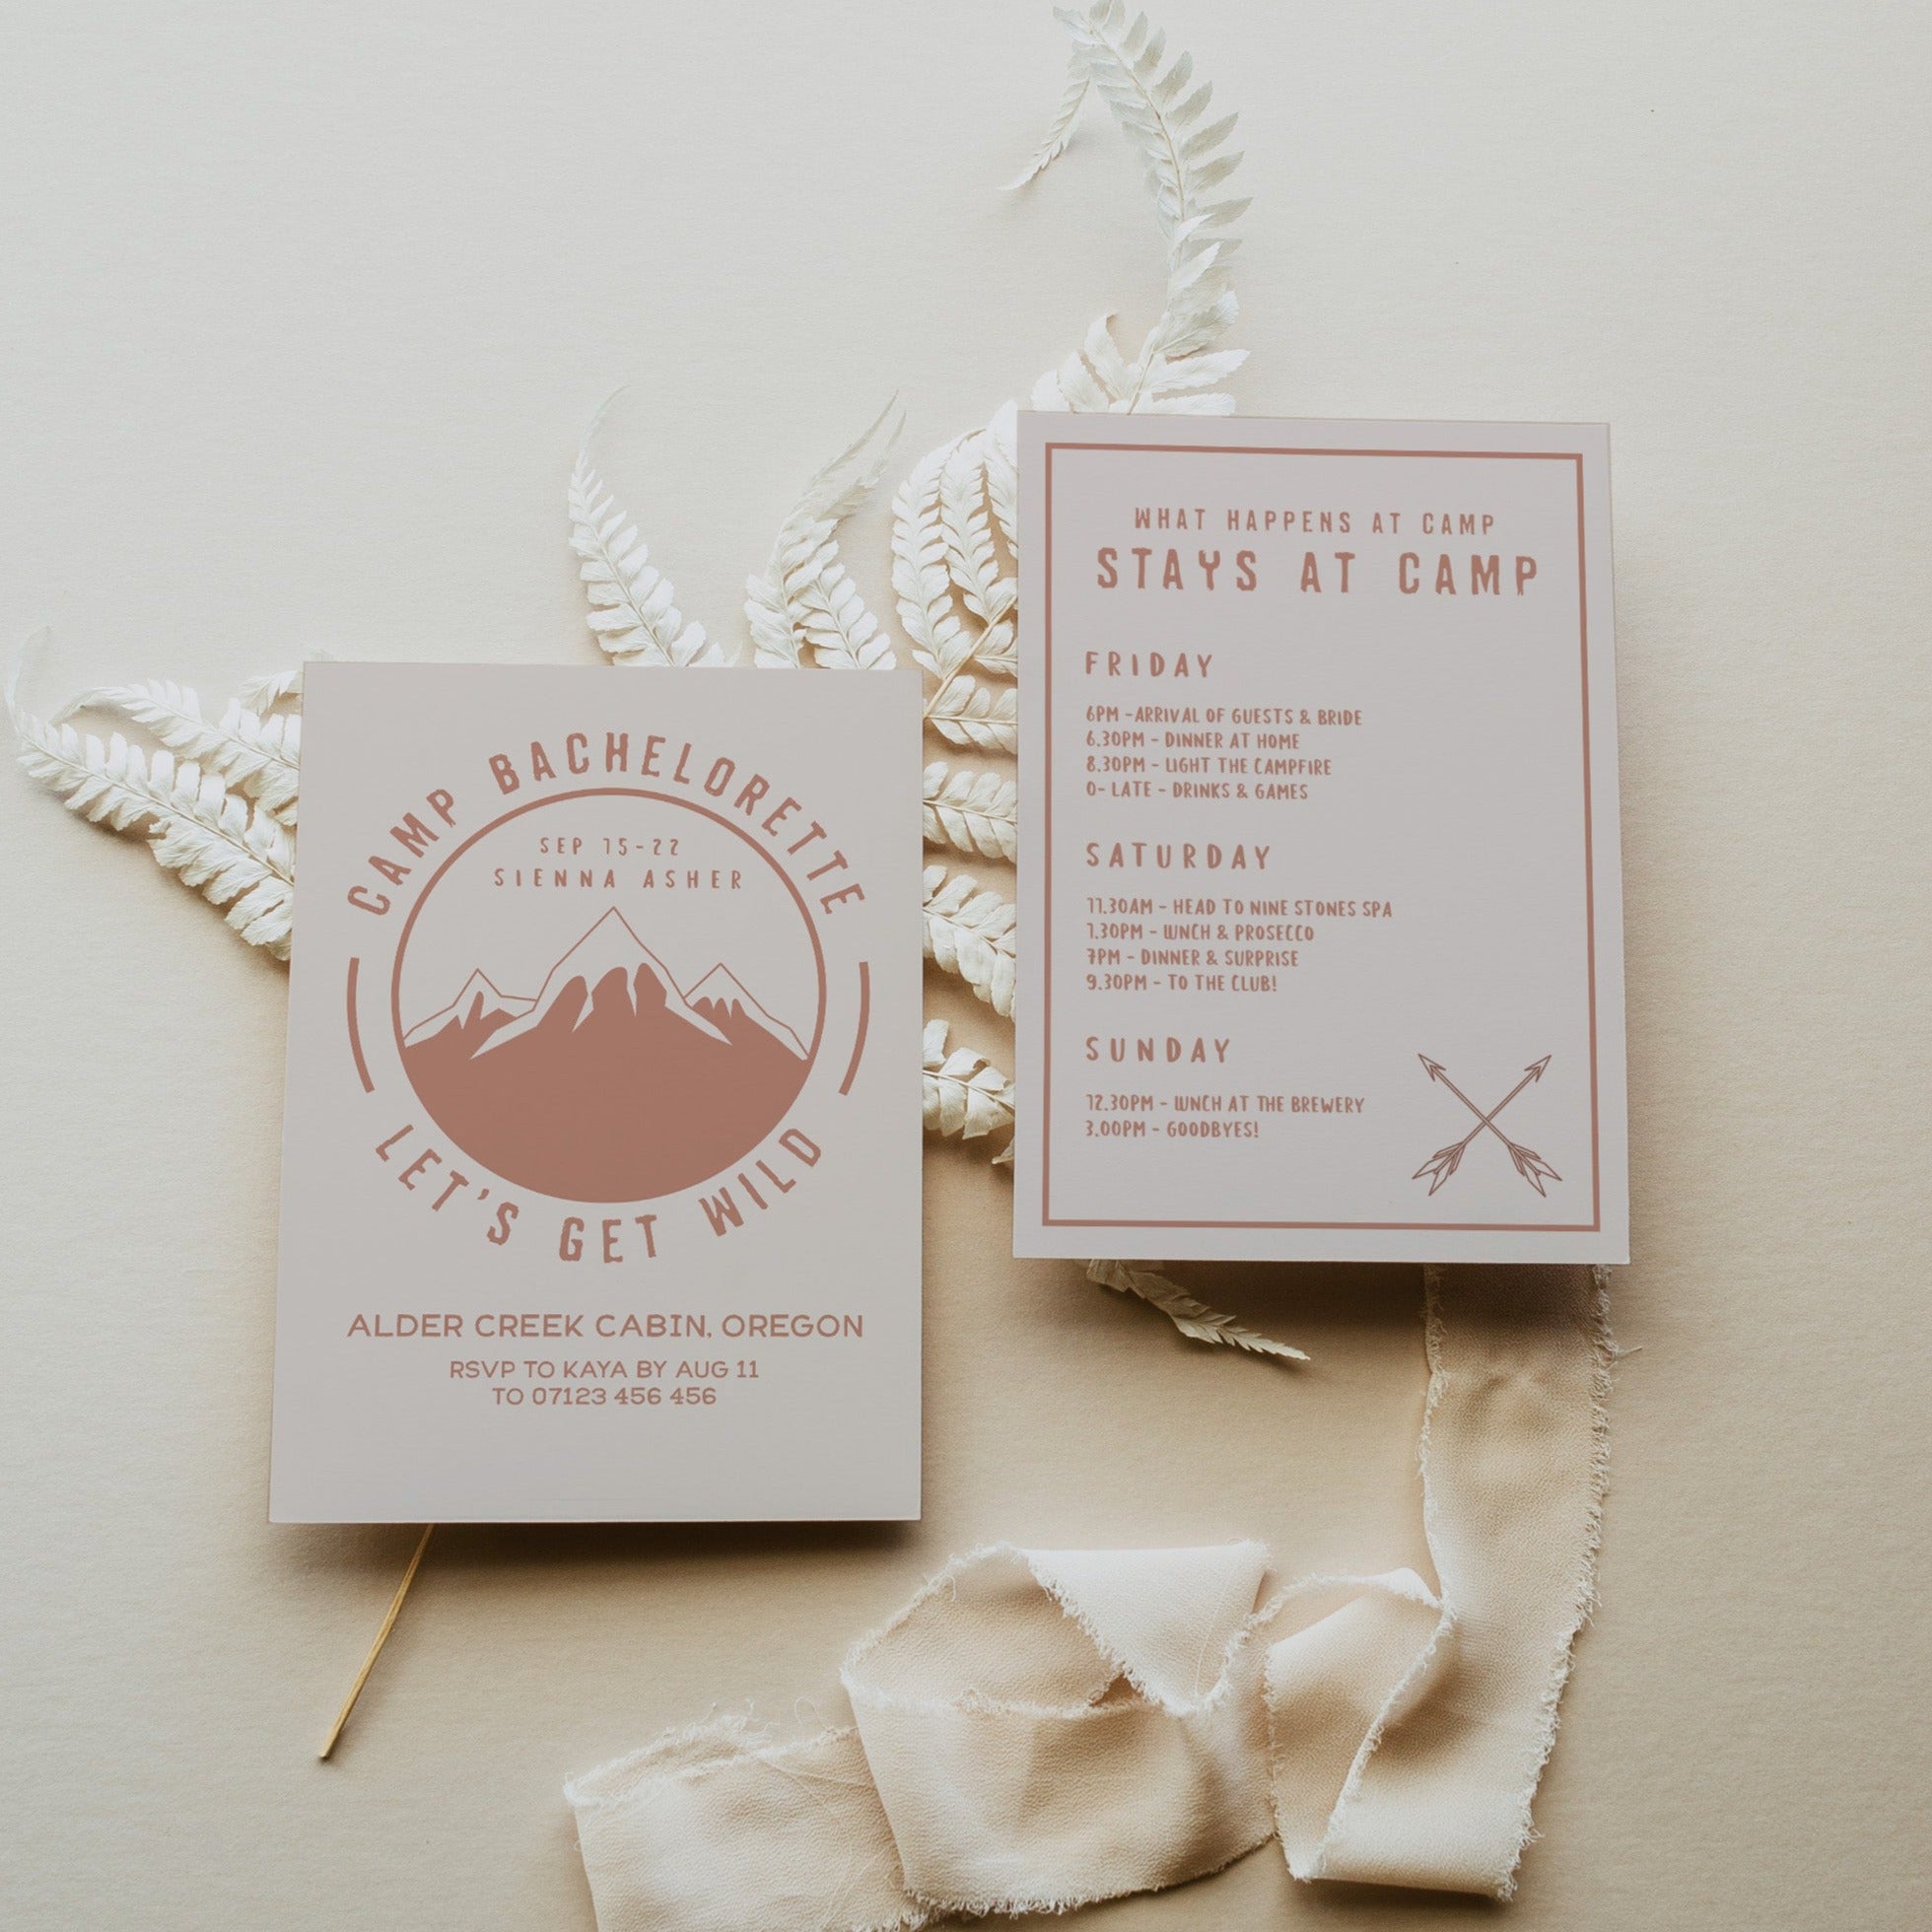 Fully editable and printable bachelorette invitations with a pine cabin design. Perfect for a cabin adventure Bachelorette themed party